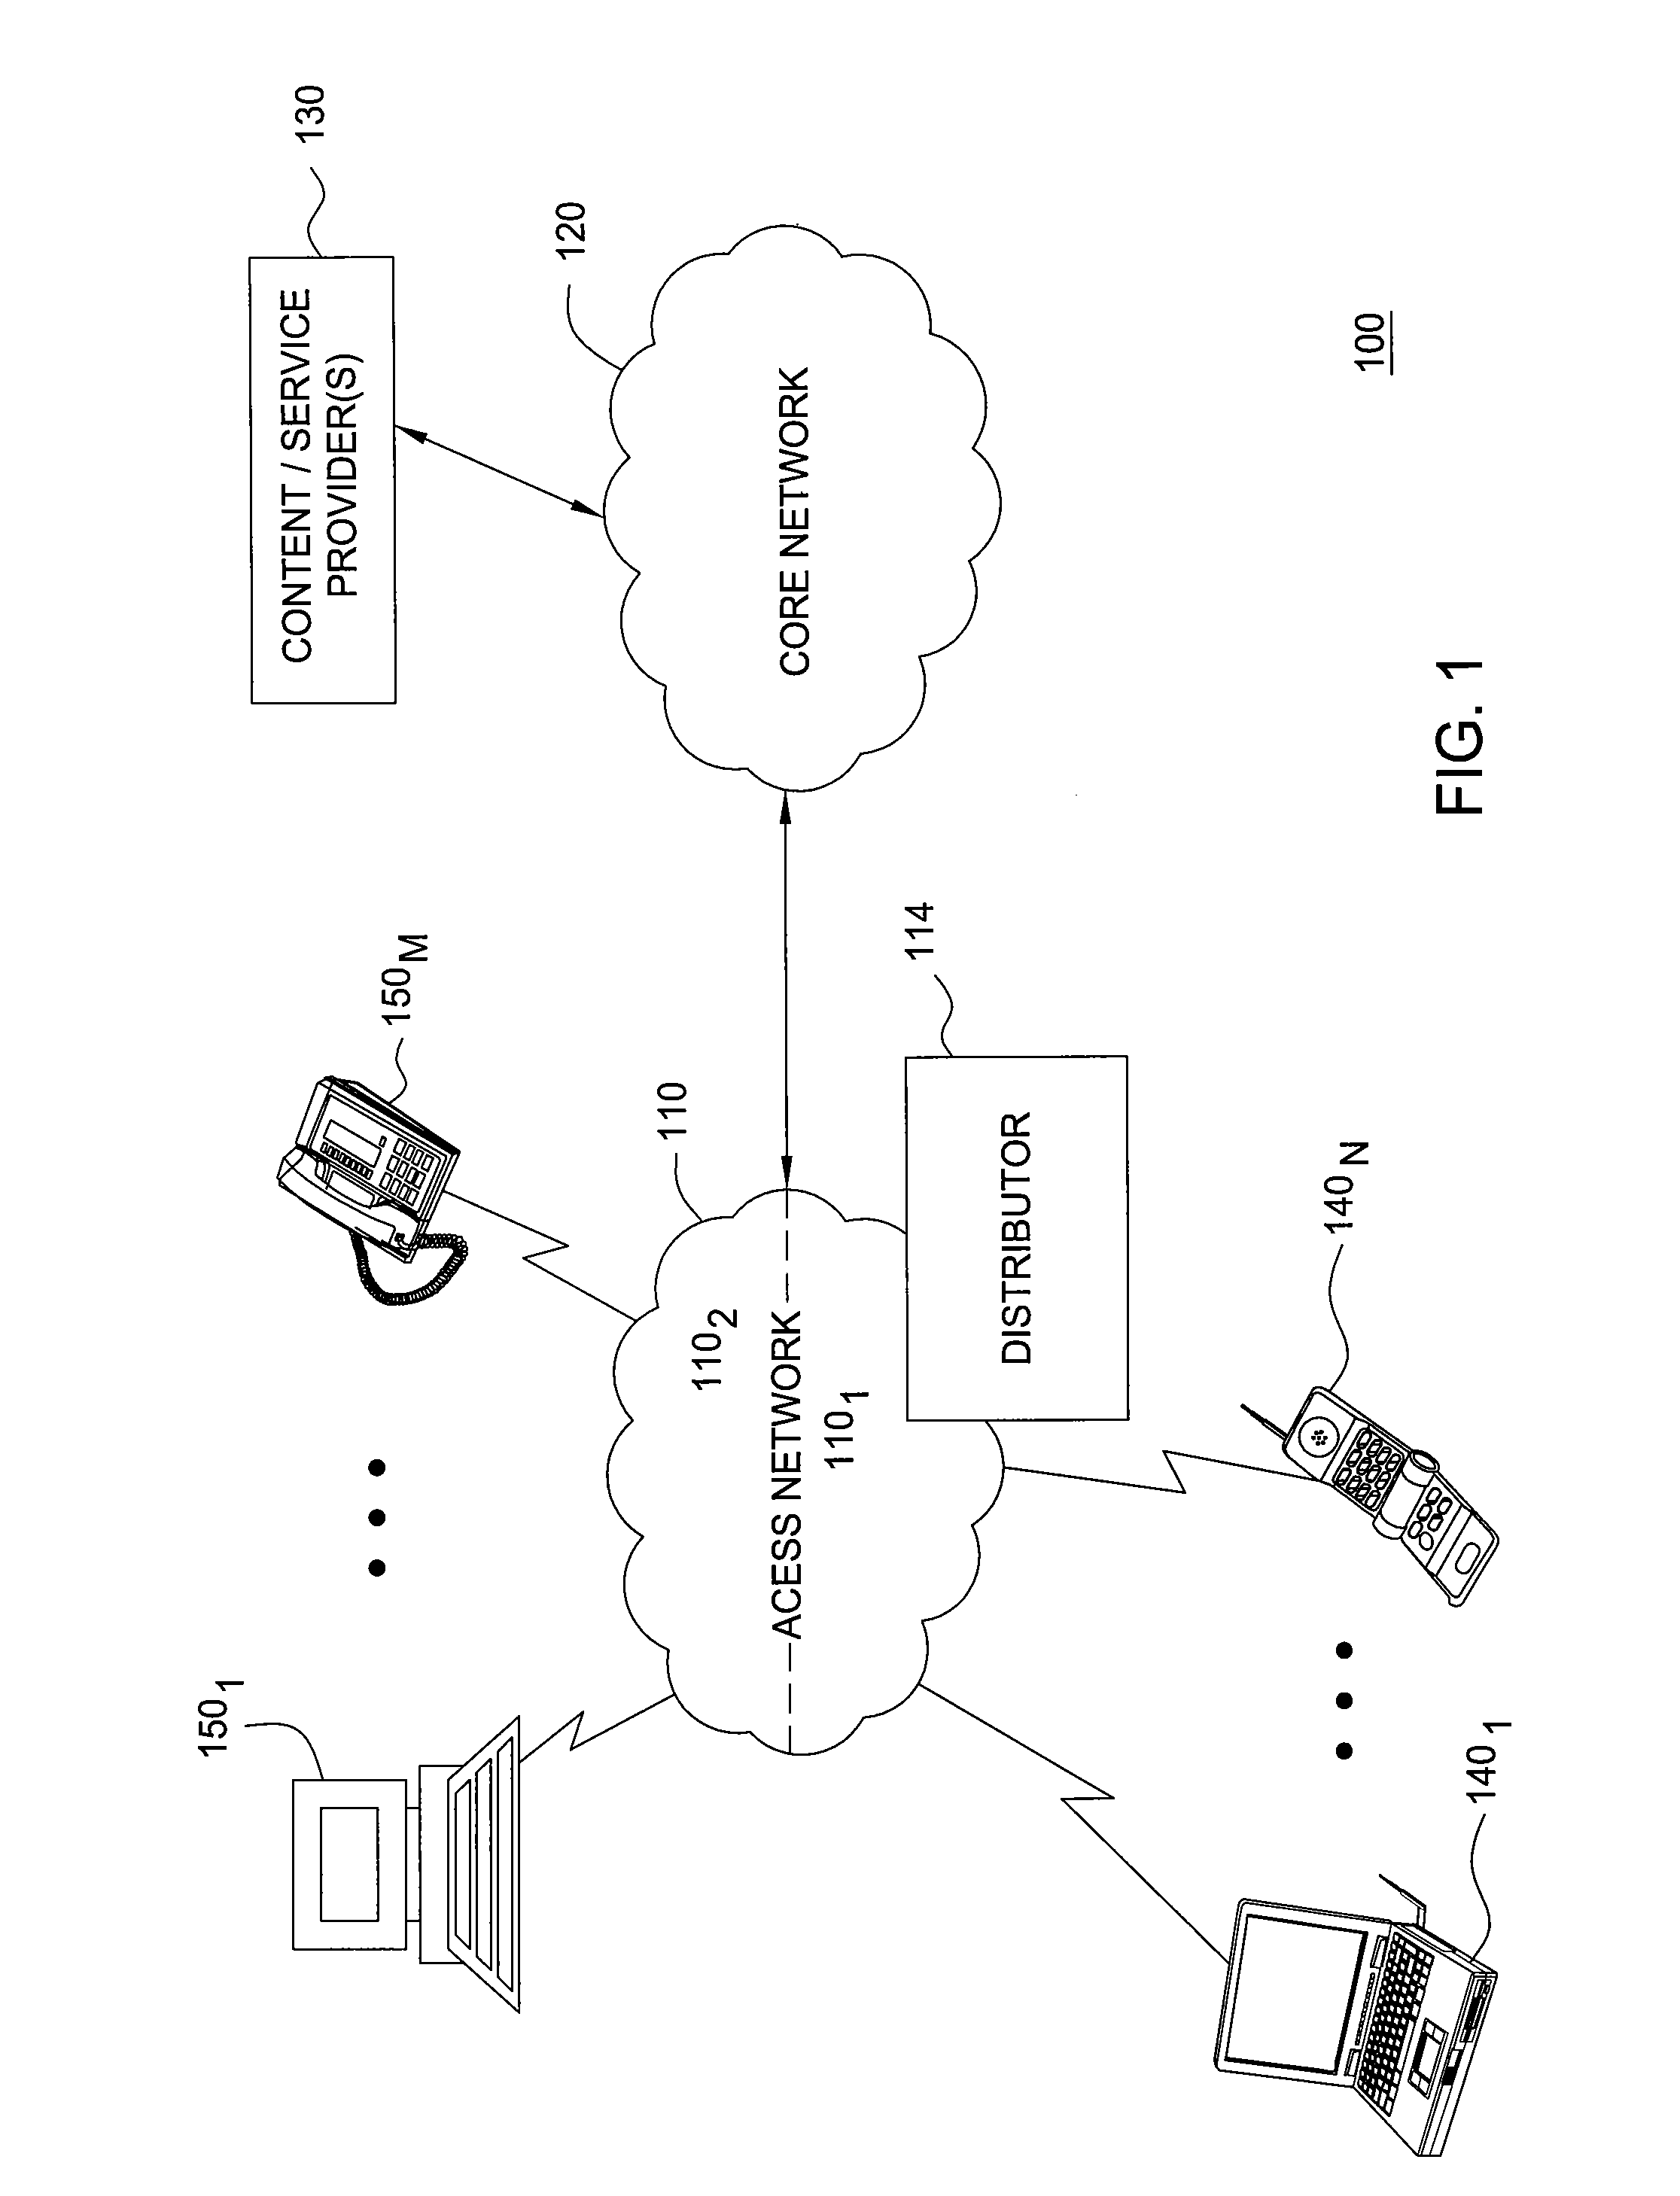 Method and apparatus for managing allocation of resources in a network